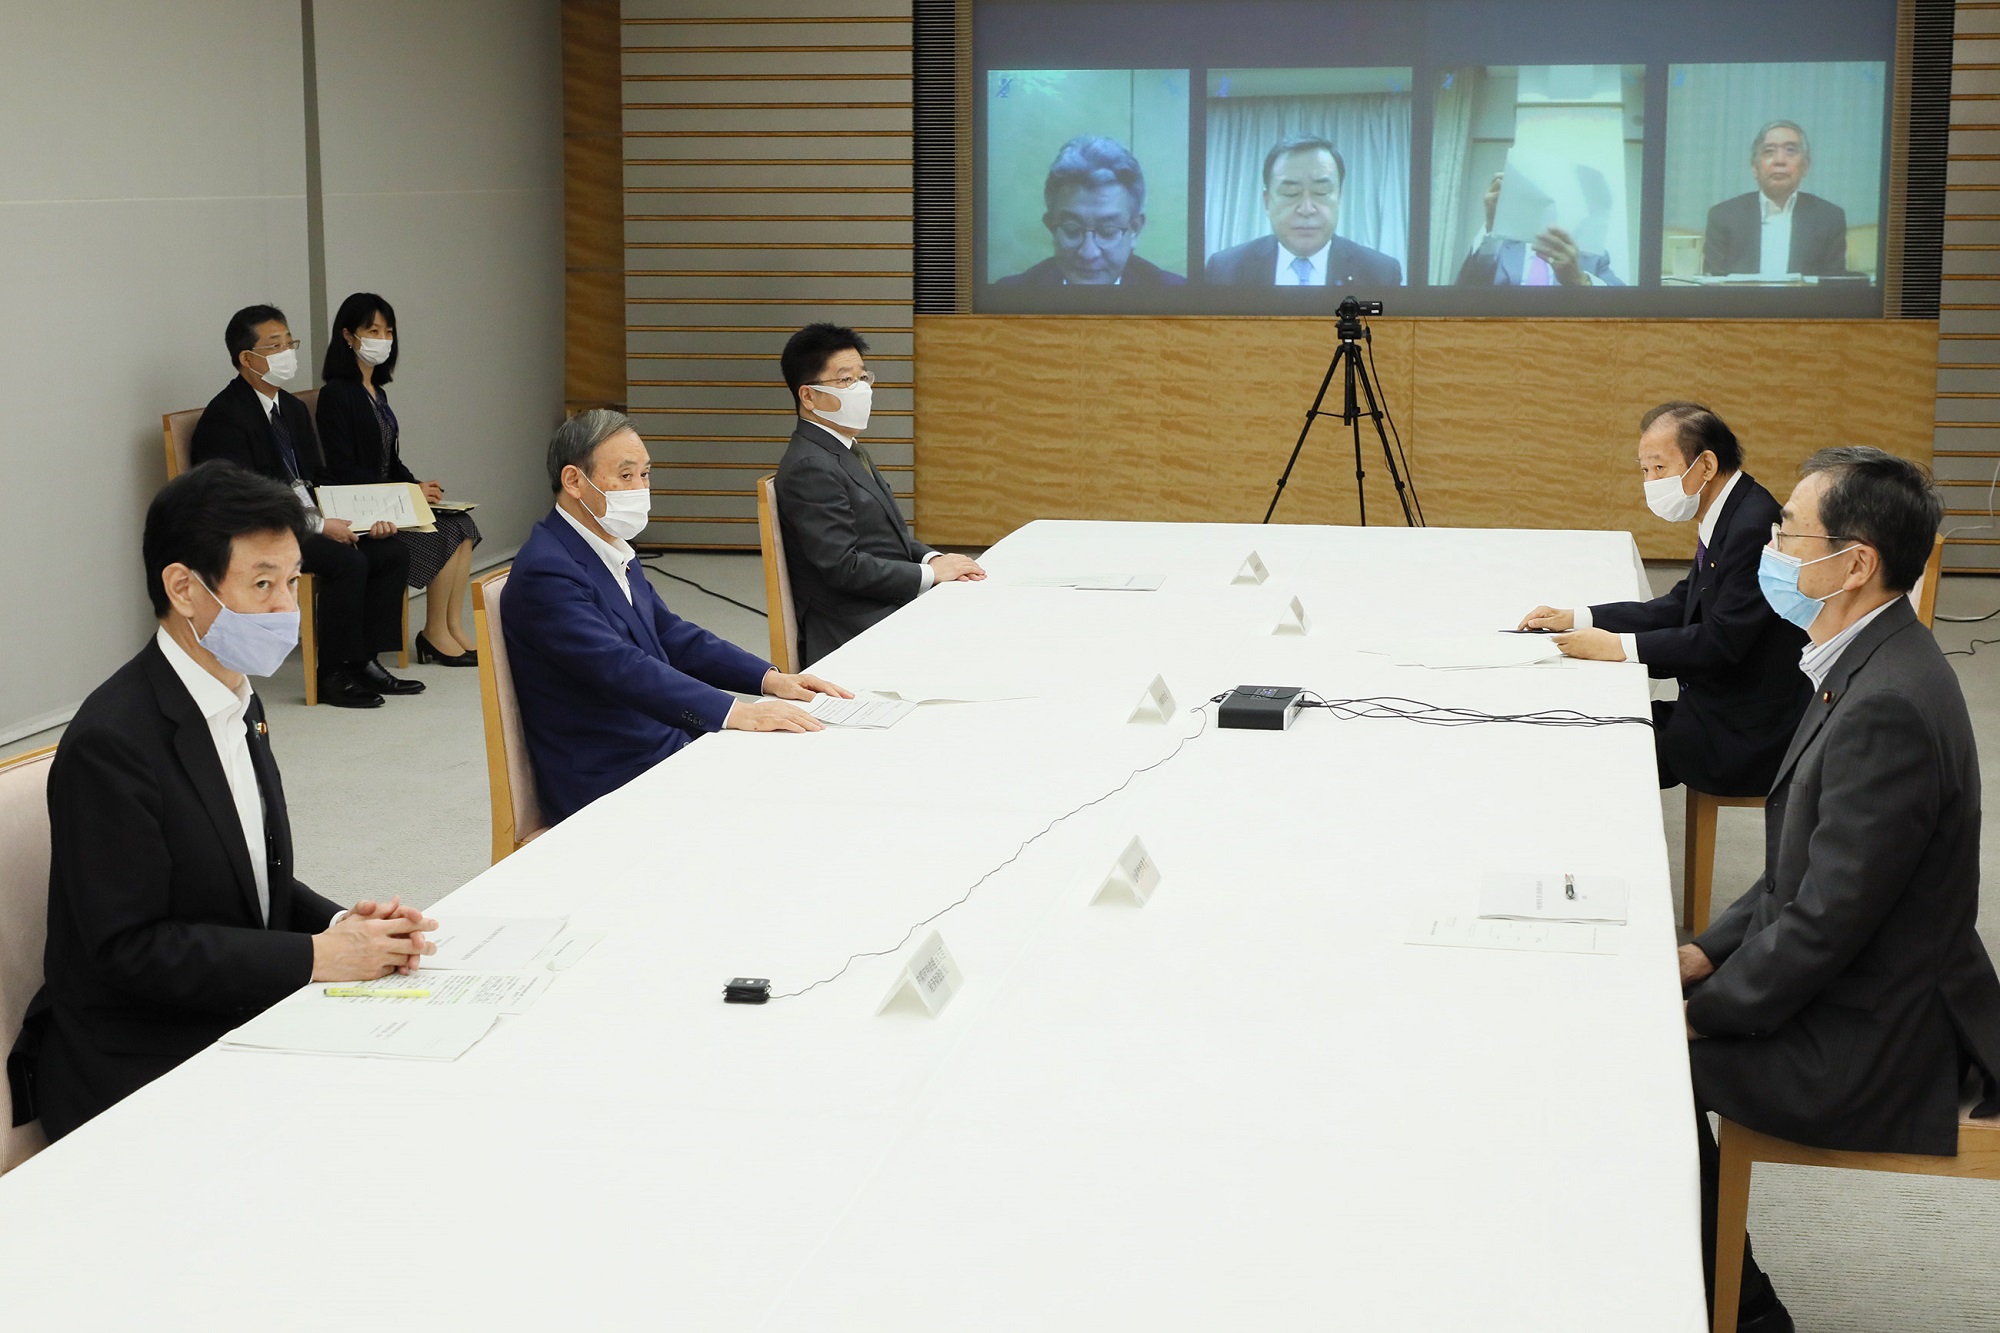 Photograph of the Prime Minister attending the meeting (1)